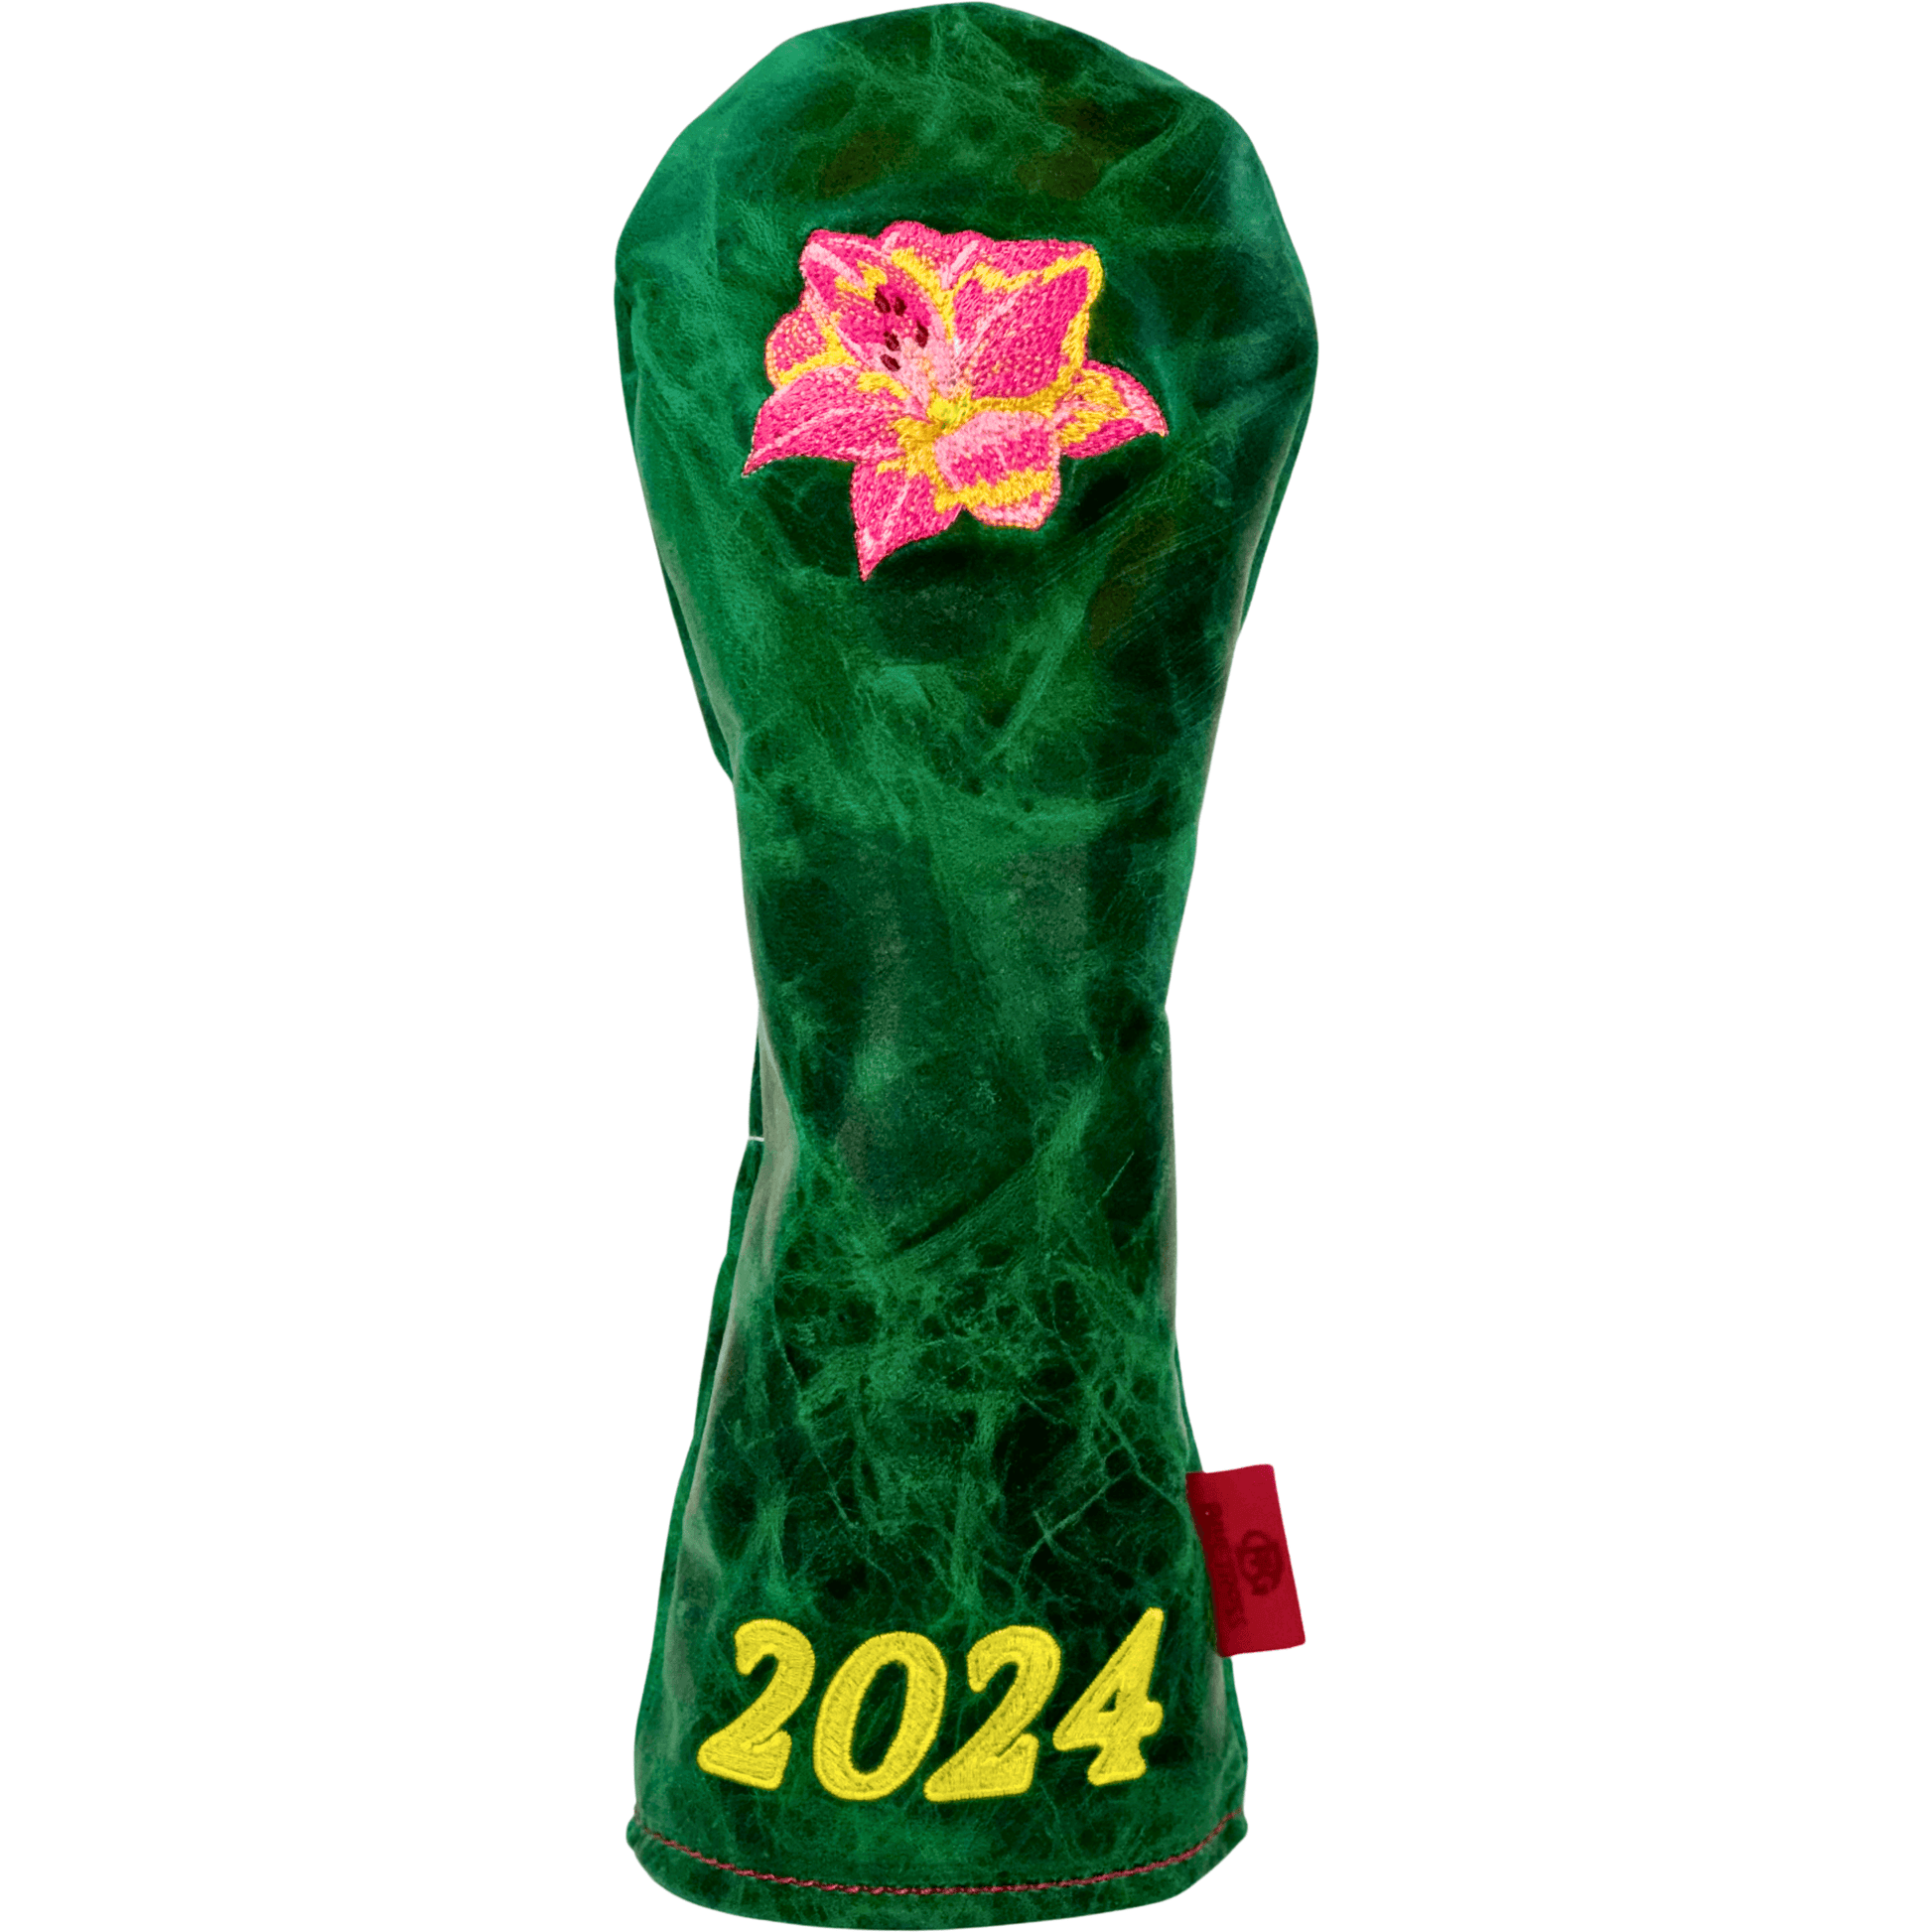 Driver Headcover in Golf Green Dublin leather with embroidered Azalea with 2024 Date